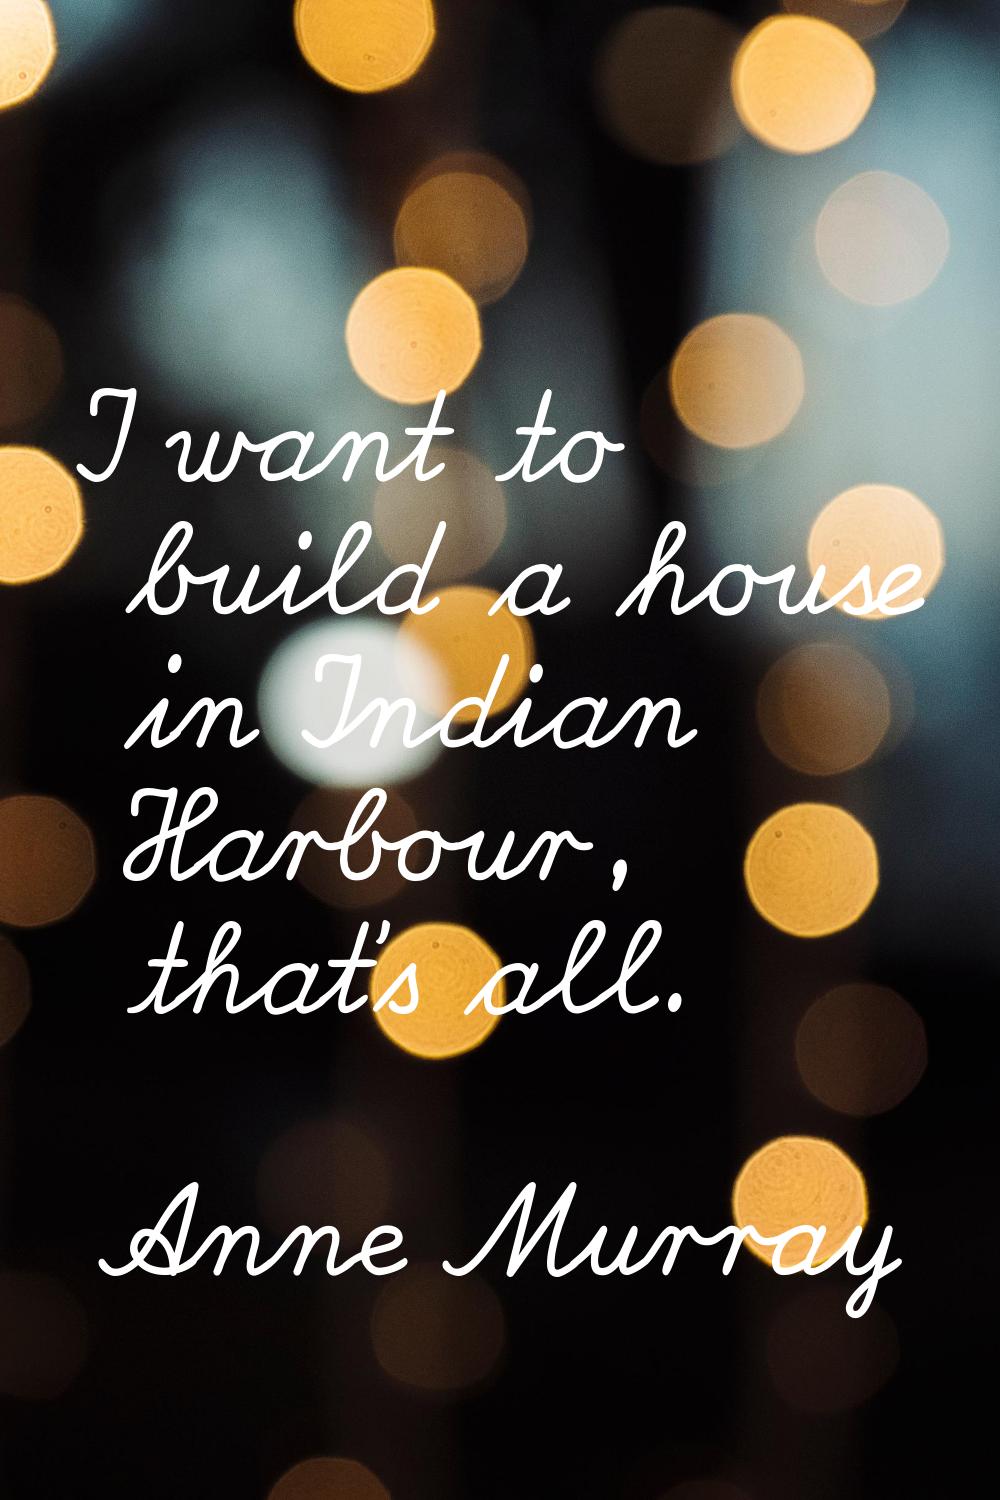 I want to build a house in Indian Harbour, that's all.